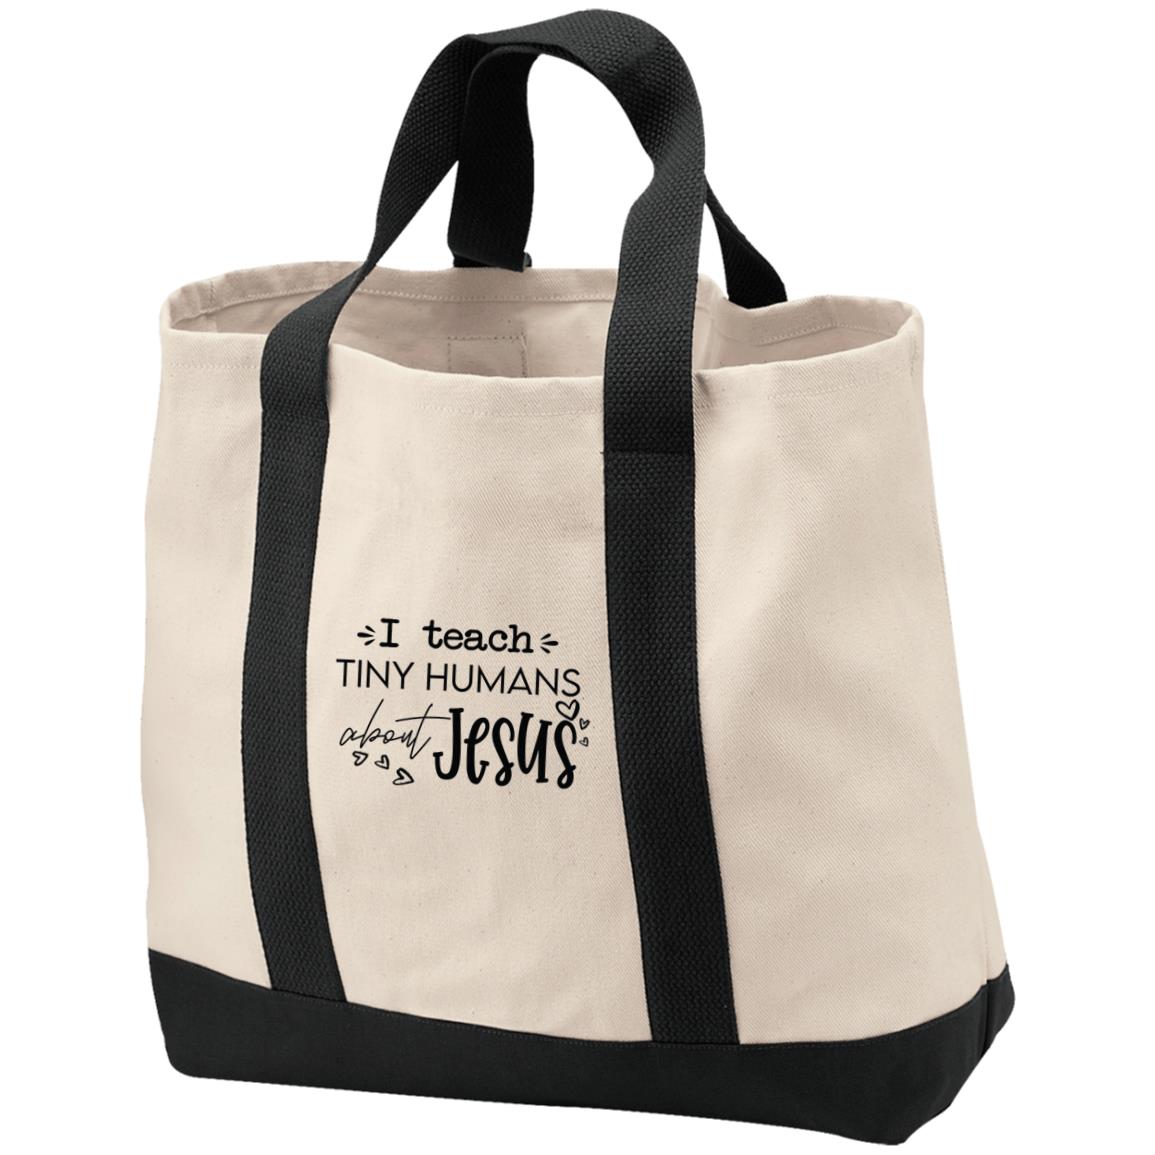 I teach tiny humans about Jesus cotton tote bag